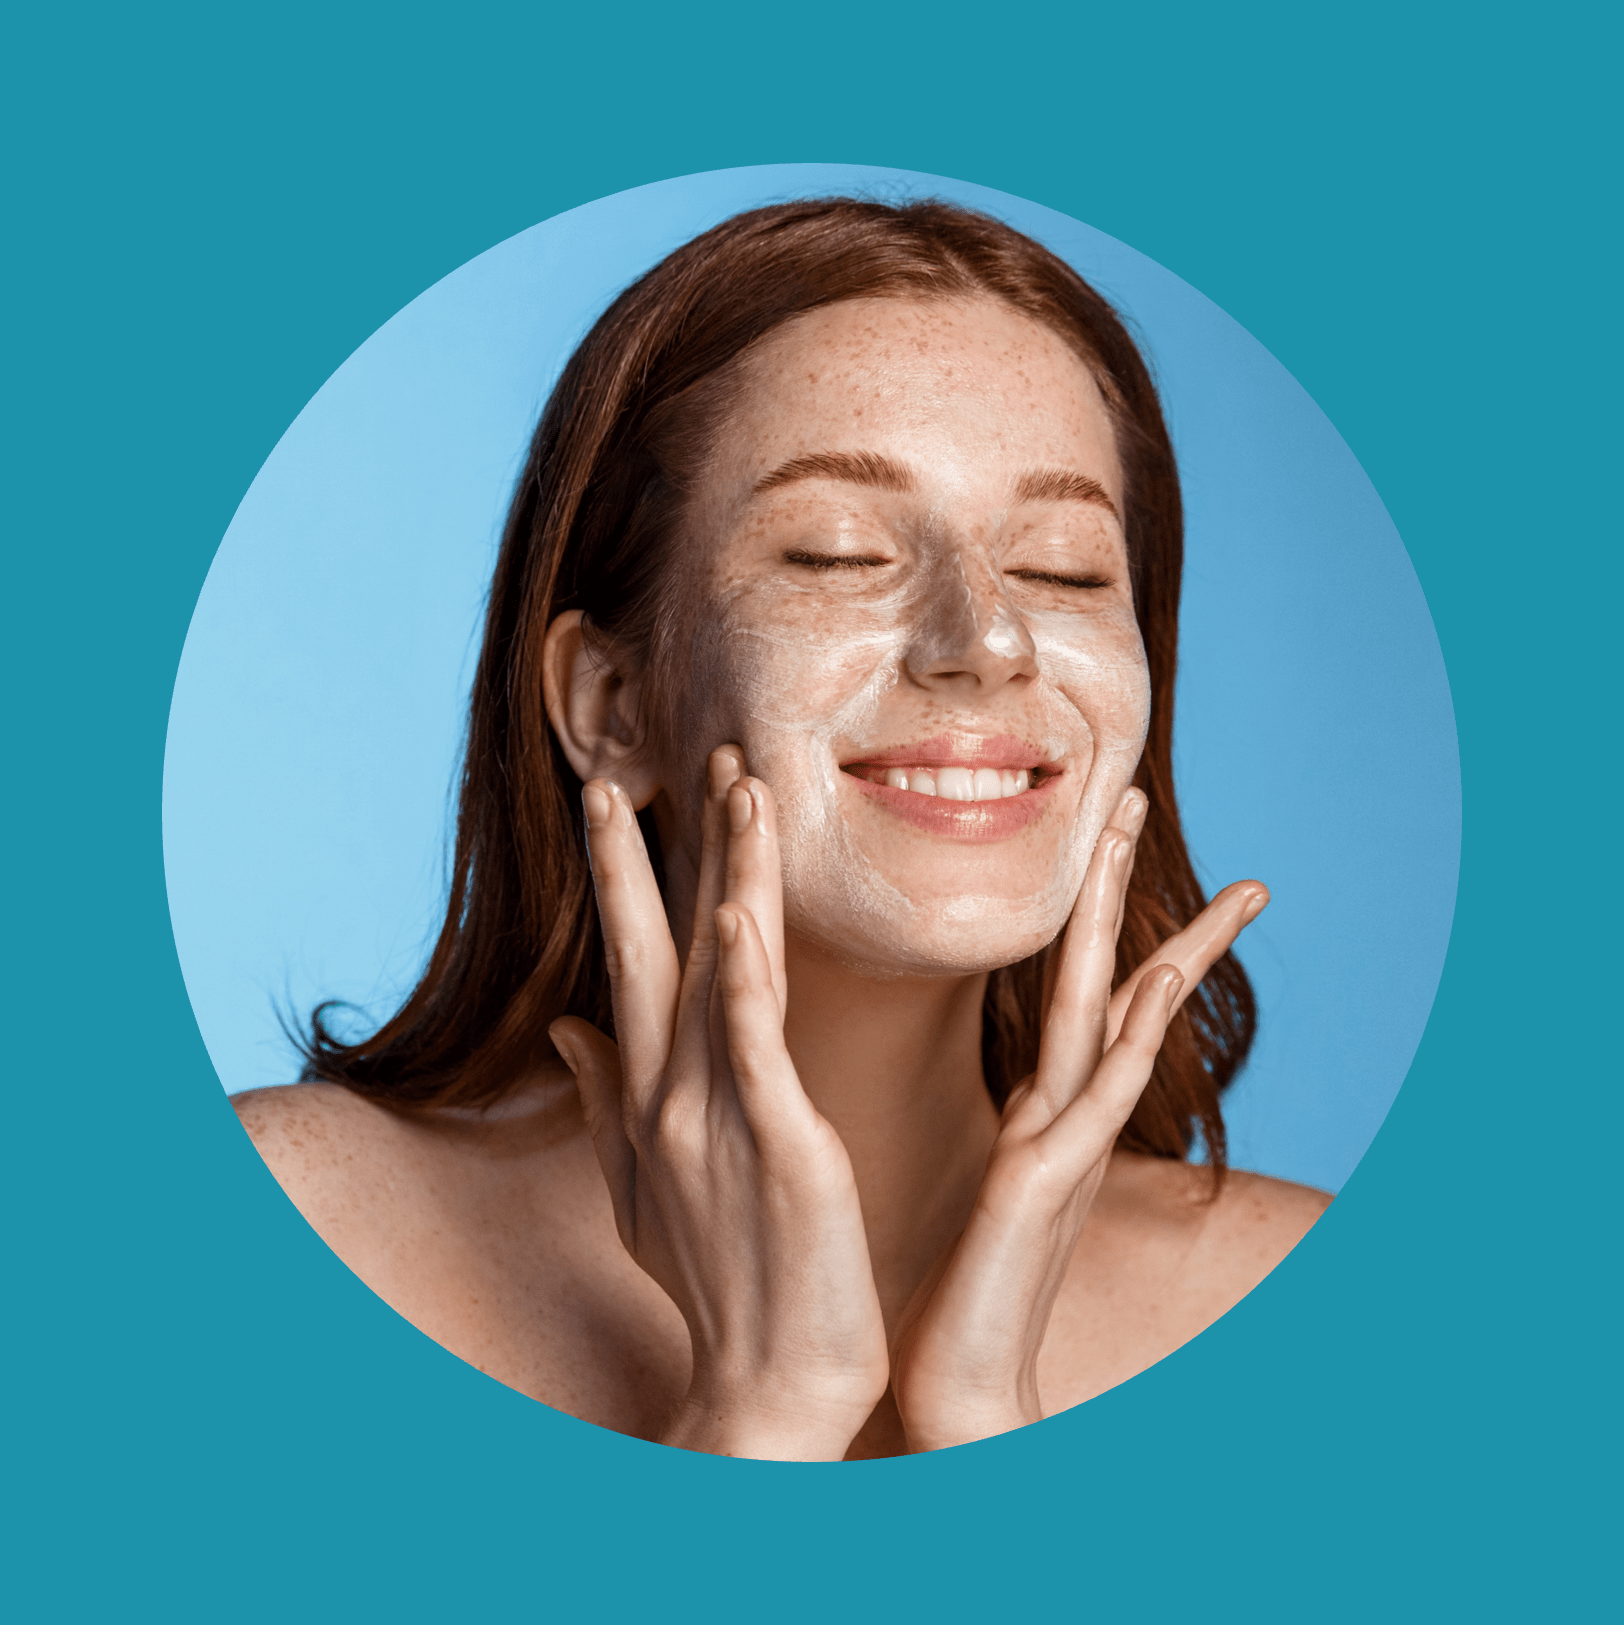 Smiling redhead girl with freckles washing her face, using cleanser, skin care gel after shower, standing over blue backgroundSmiling redhead girl with freckles washing her face, using cleanser, skin care gel after shower, standing over blue background